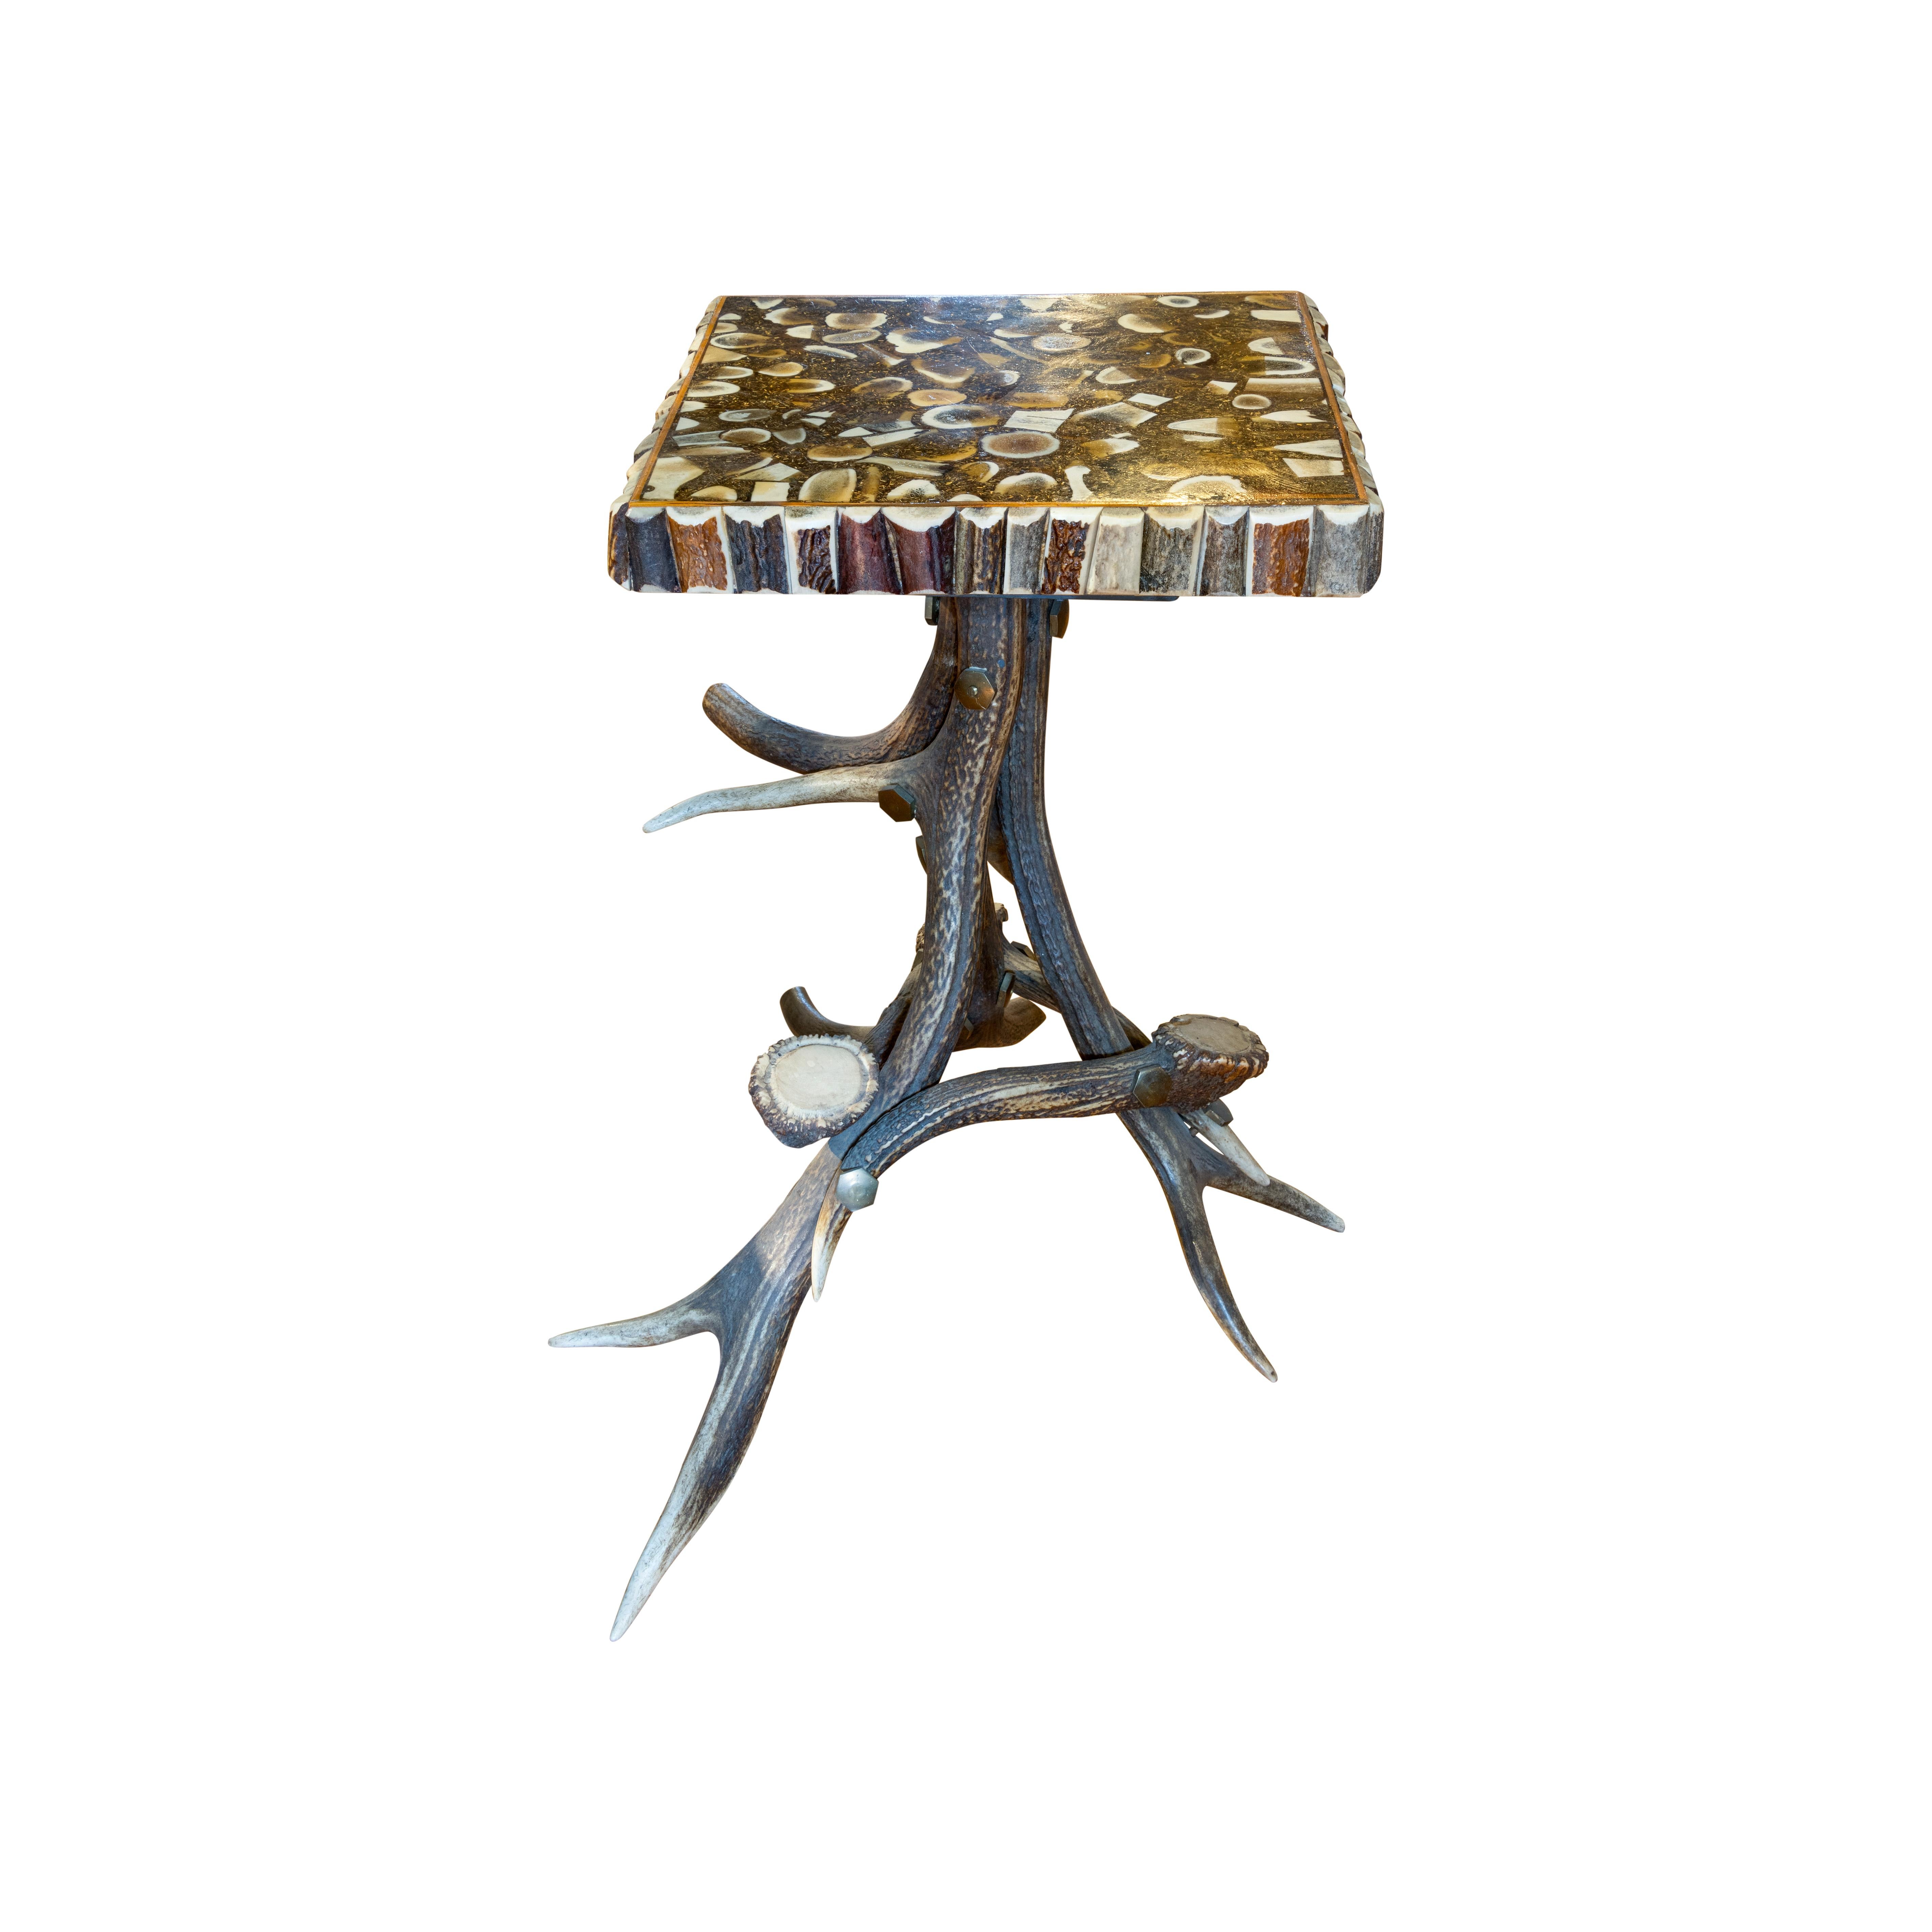 Black Forest horn table with 4 matching stools. Table size. Stools are 13